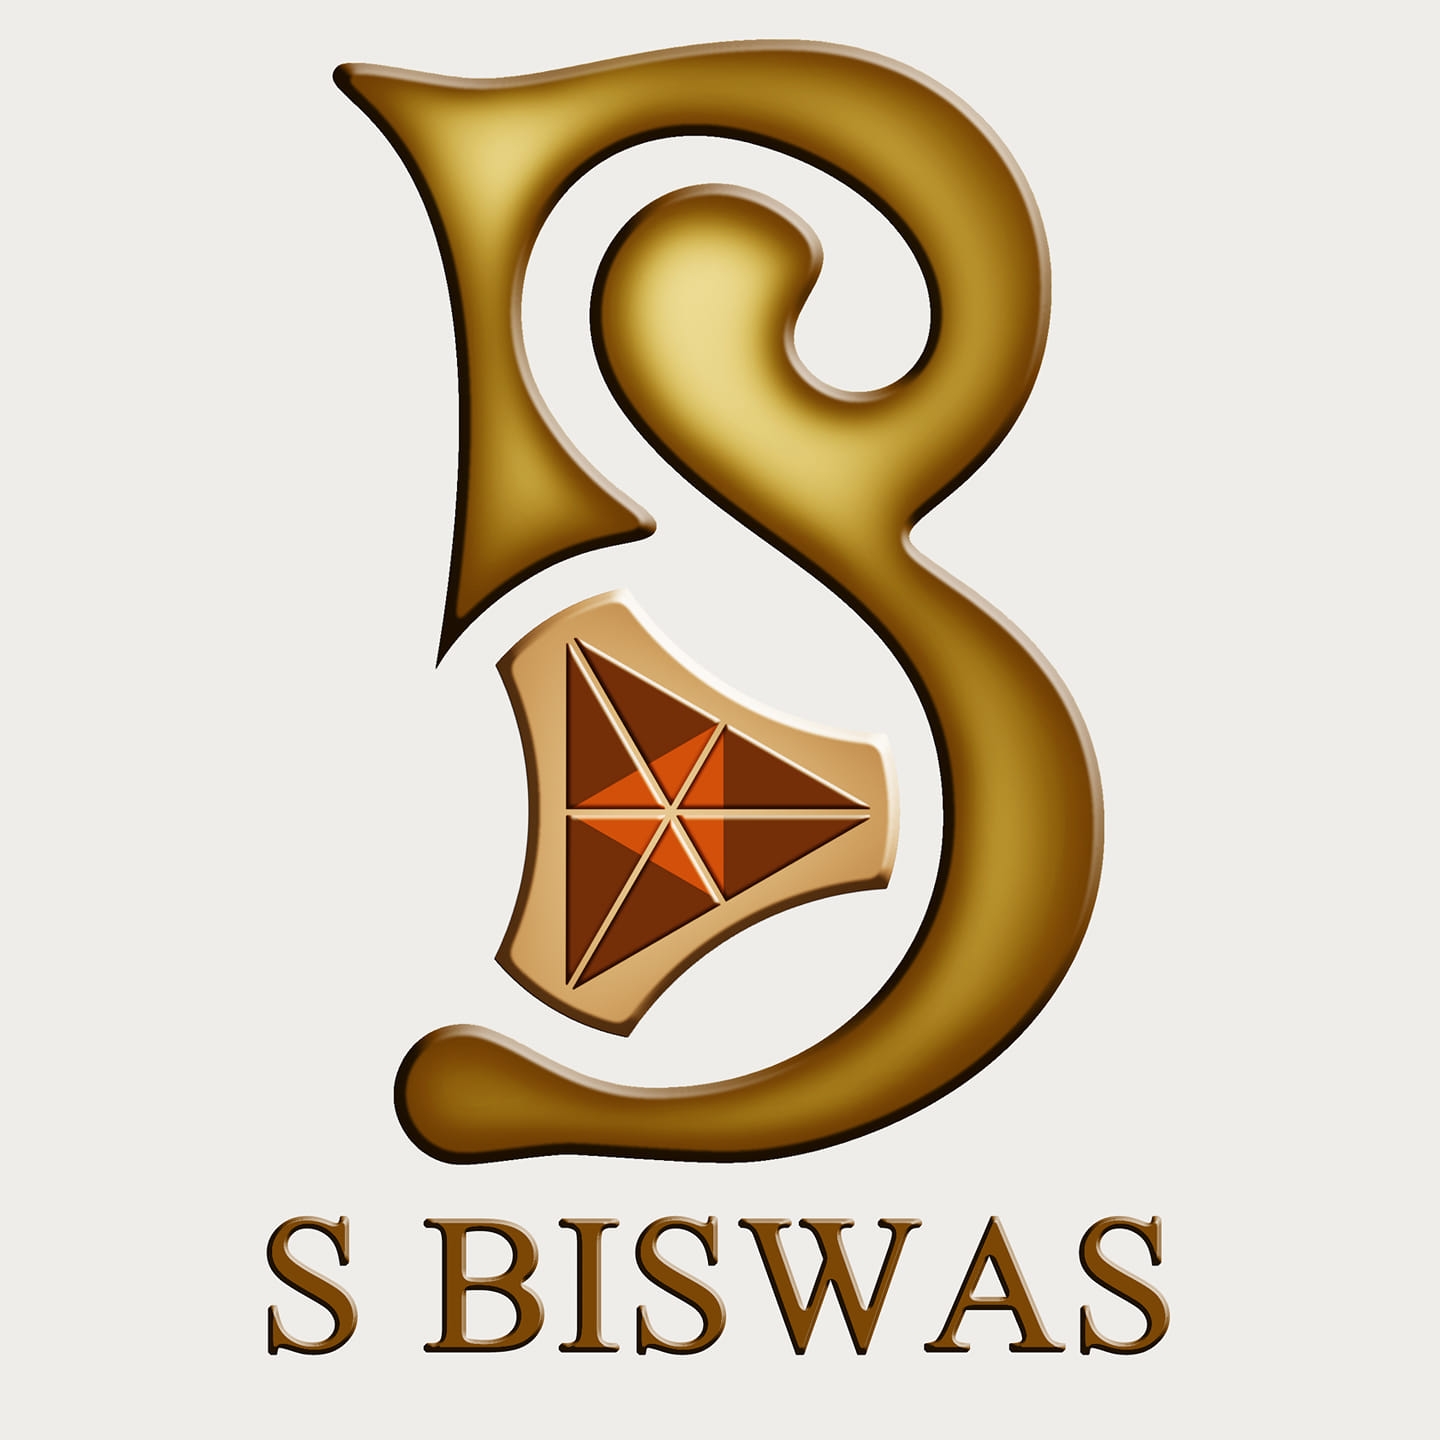 S BISWAS - The Art of Living Logo